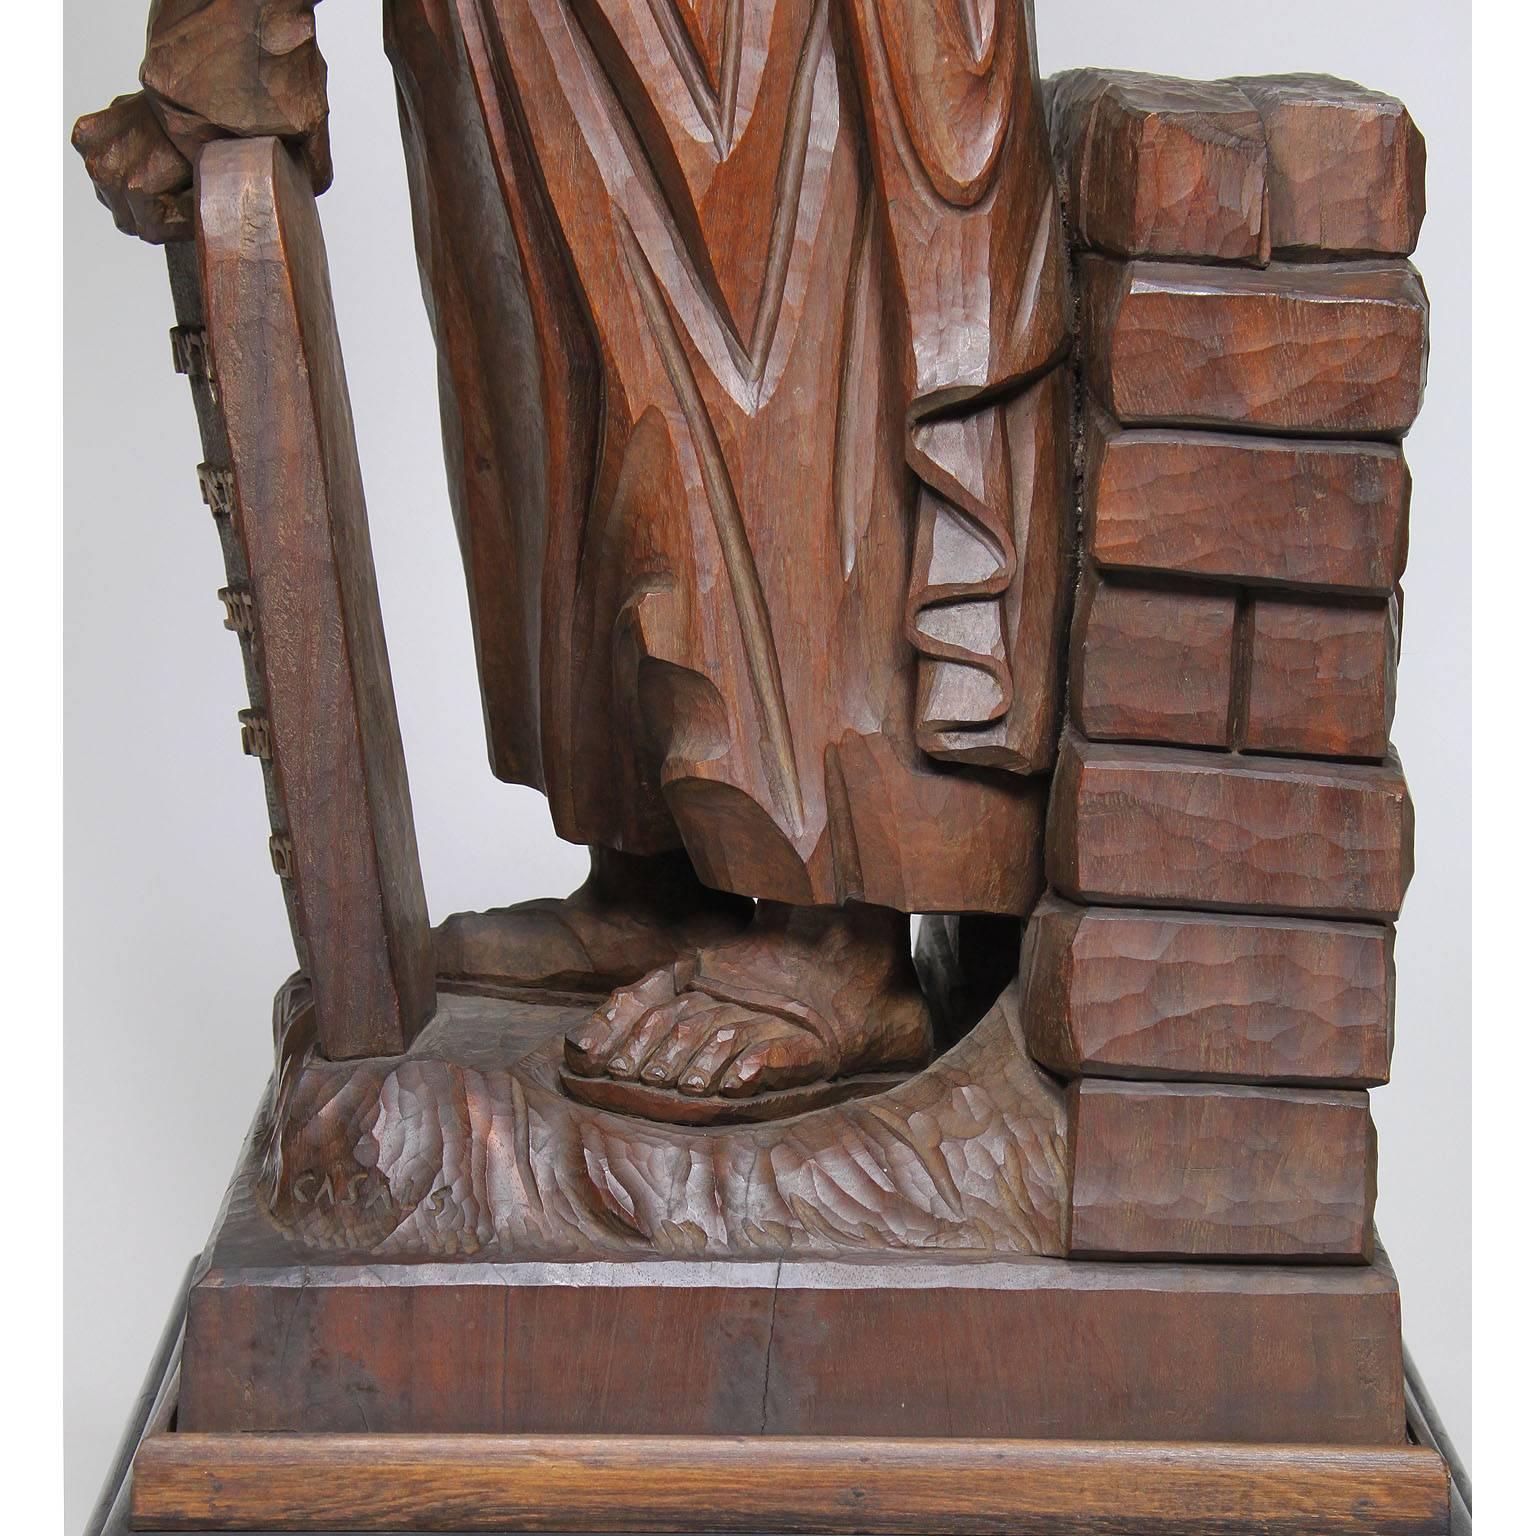 Hand-Carved 19th-20th Century Renaissance Carved Wood Judica Figure of Michelangelo's Moses For Sale